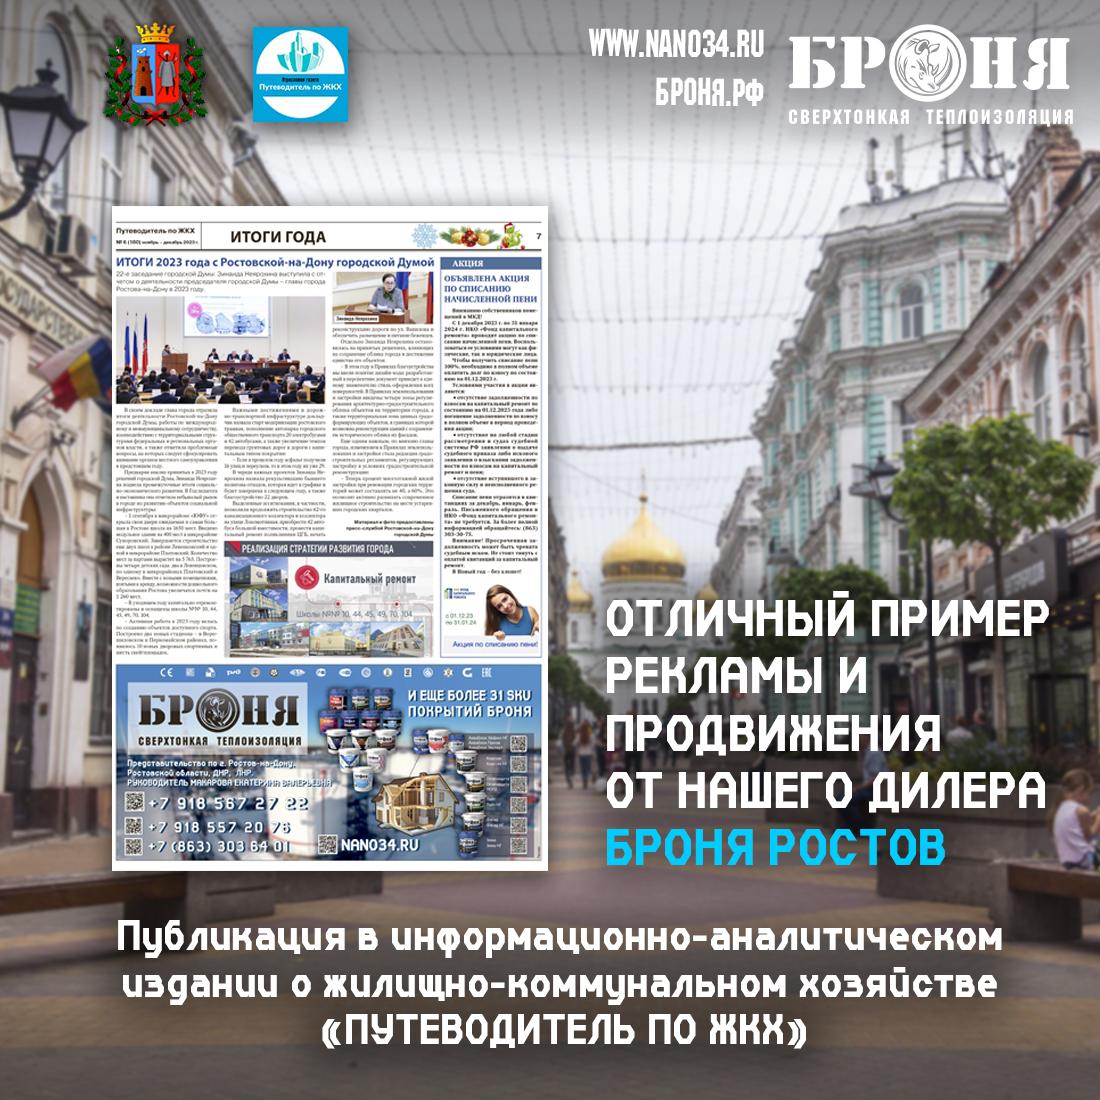 Bronya's advertisement is issued in an informational and analytical publication. An excellent example of advertising and promotion from our dealer Bronya Rostov (Newspaper)